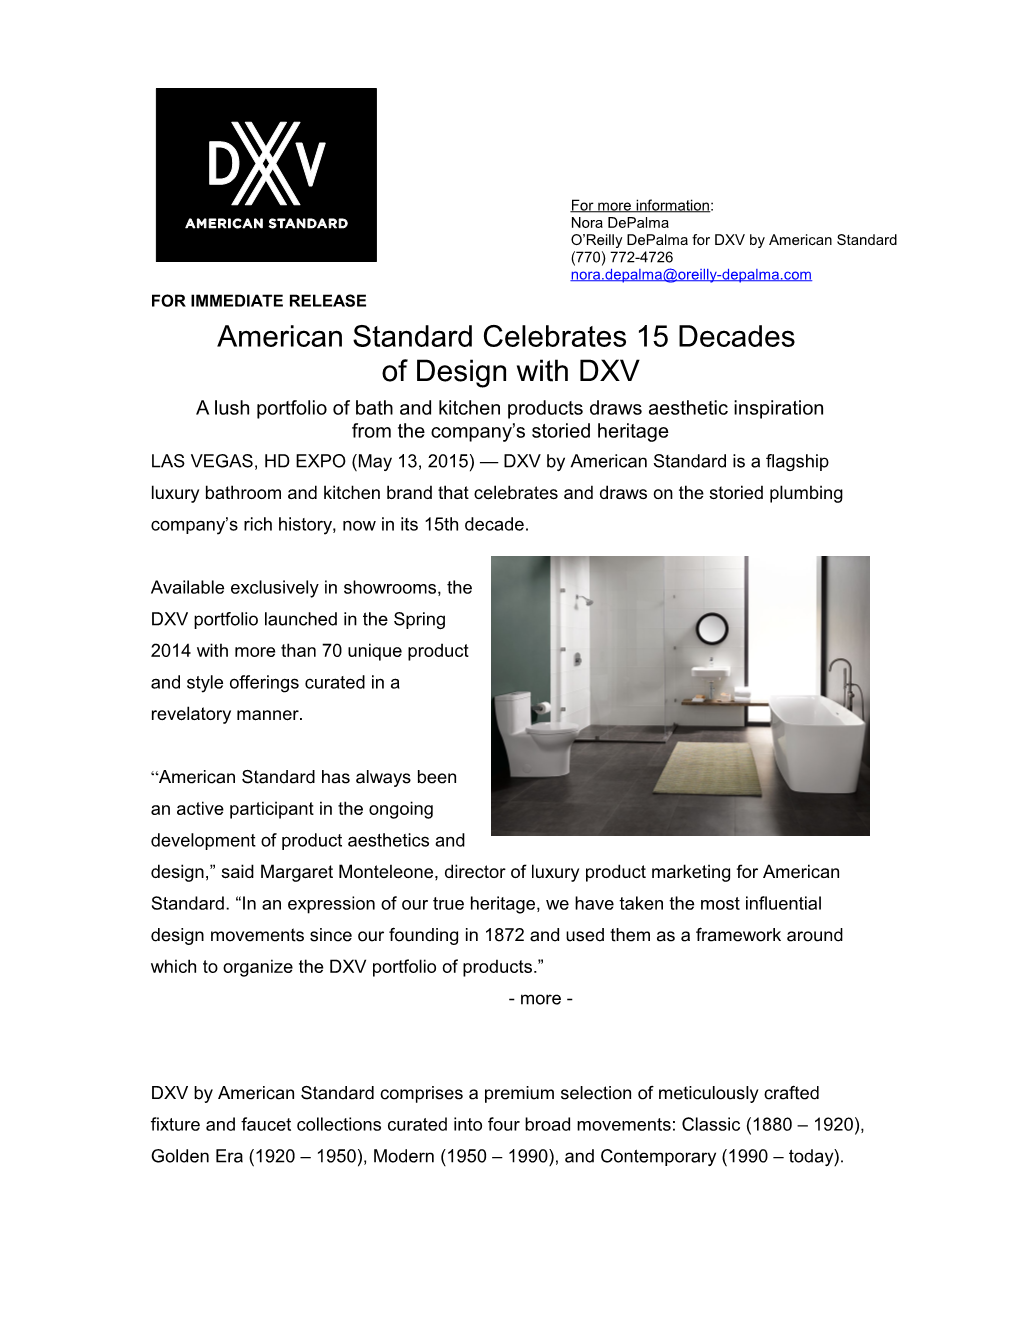 American Standard Celebrates 15 Decades of Design with DXV 3-3-3